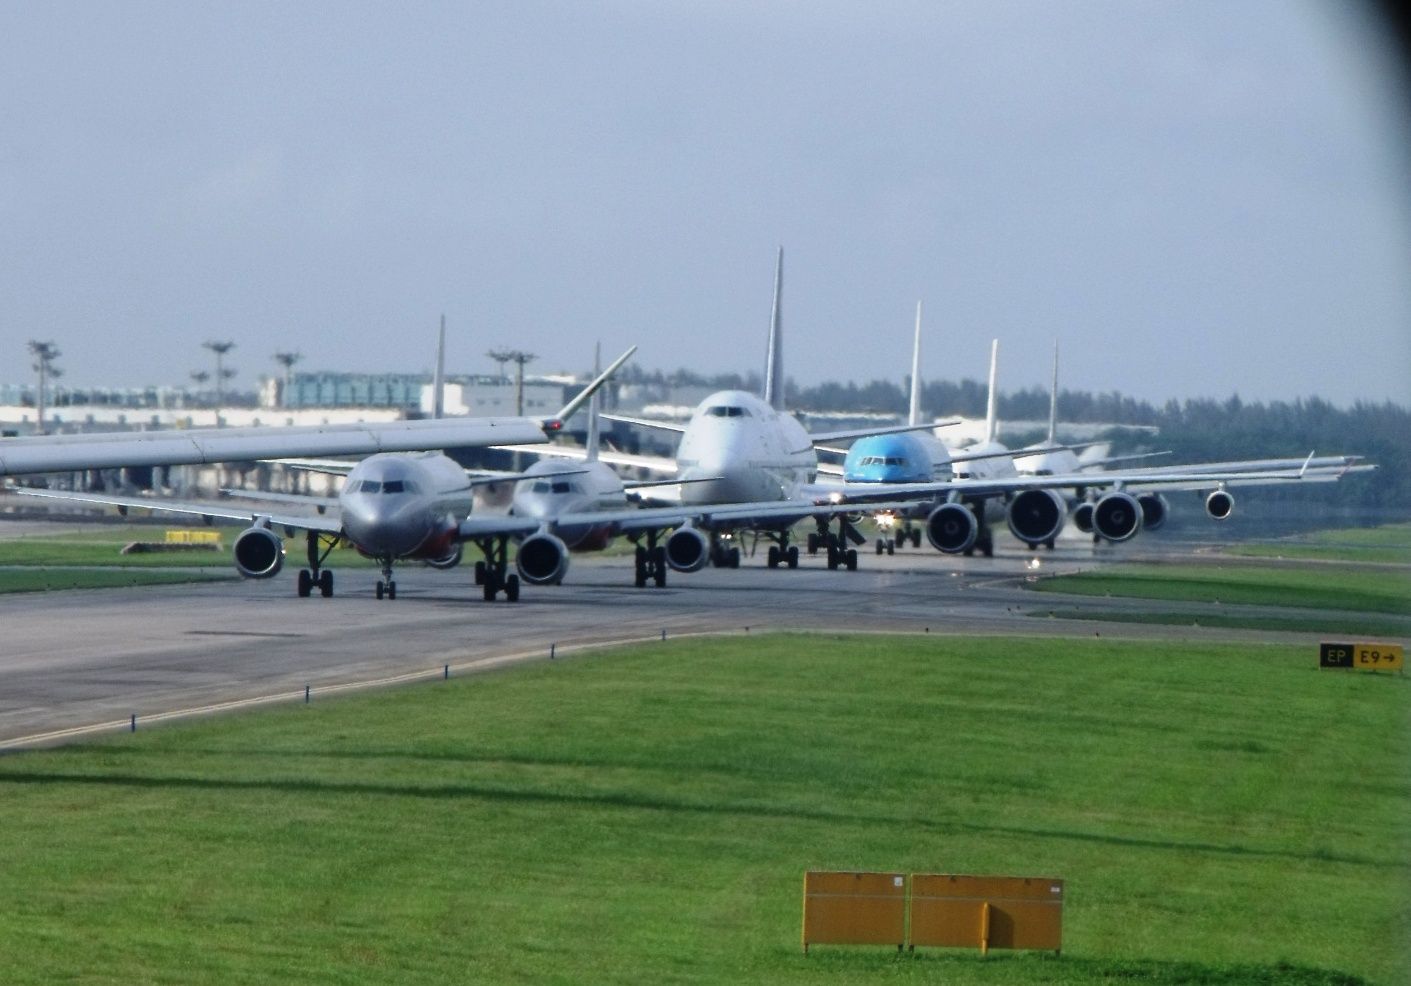 Planes queue on the taxiway in Singapore while Air TC changes the operating direction of the runway.